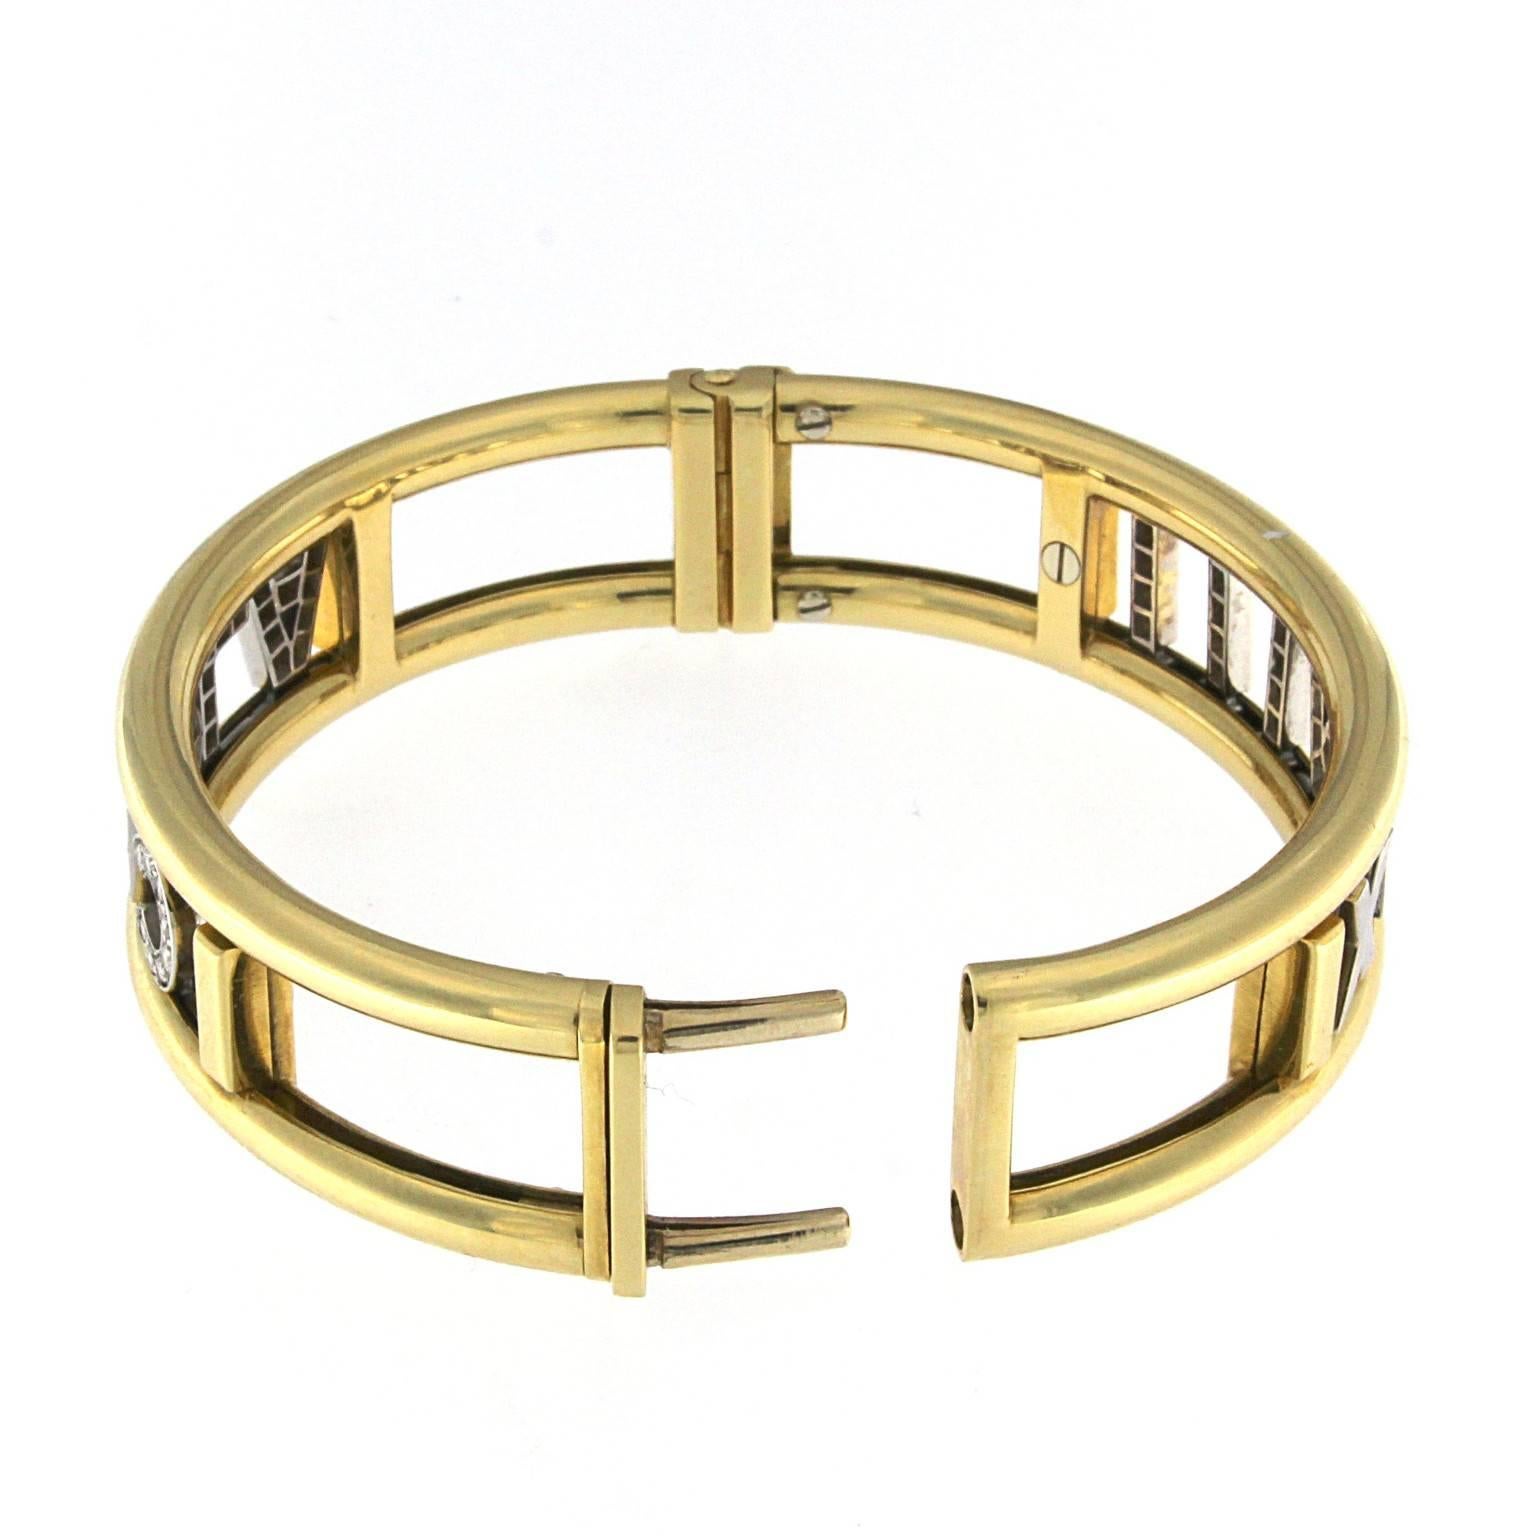 Brilliant Cut Carla Bracelet and Dates in Diamonds on White Gold and Yellow Bangle For Sale